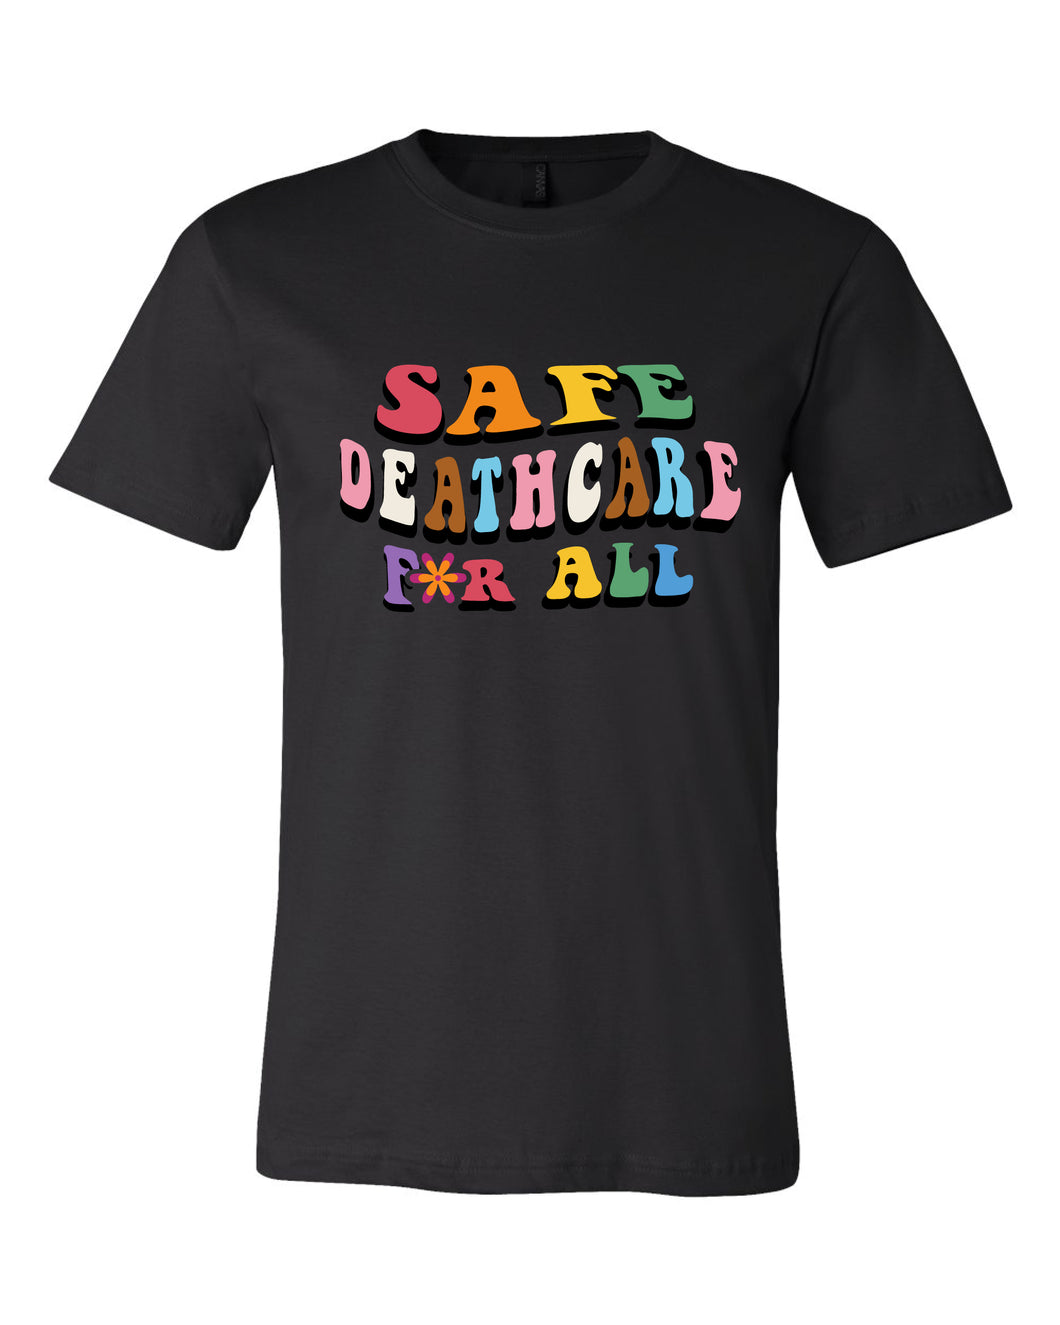 Safe Deathcare for All Tee